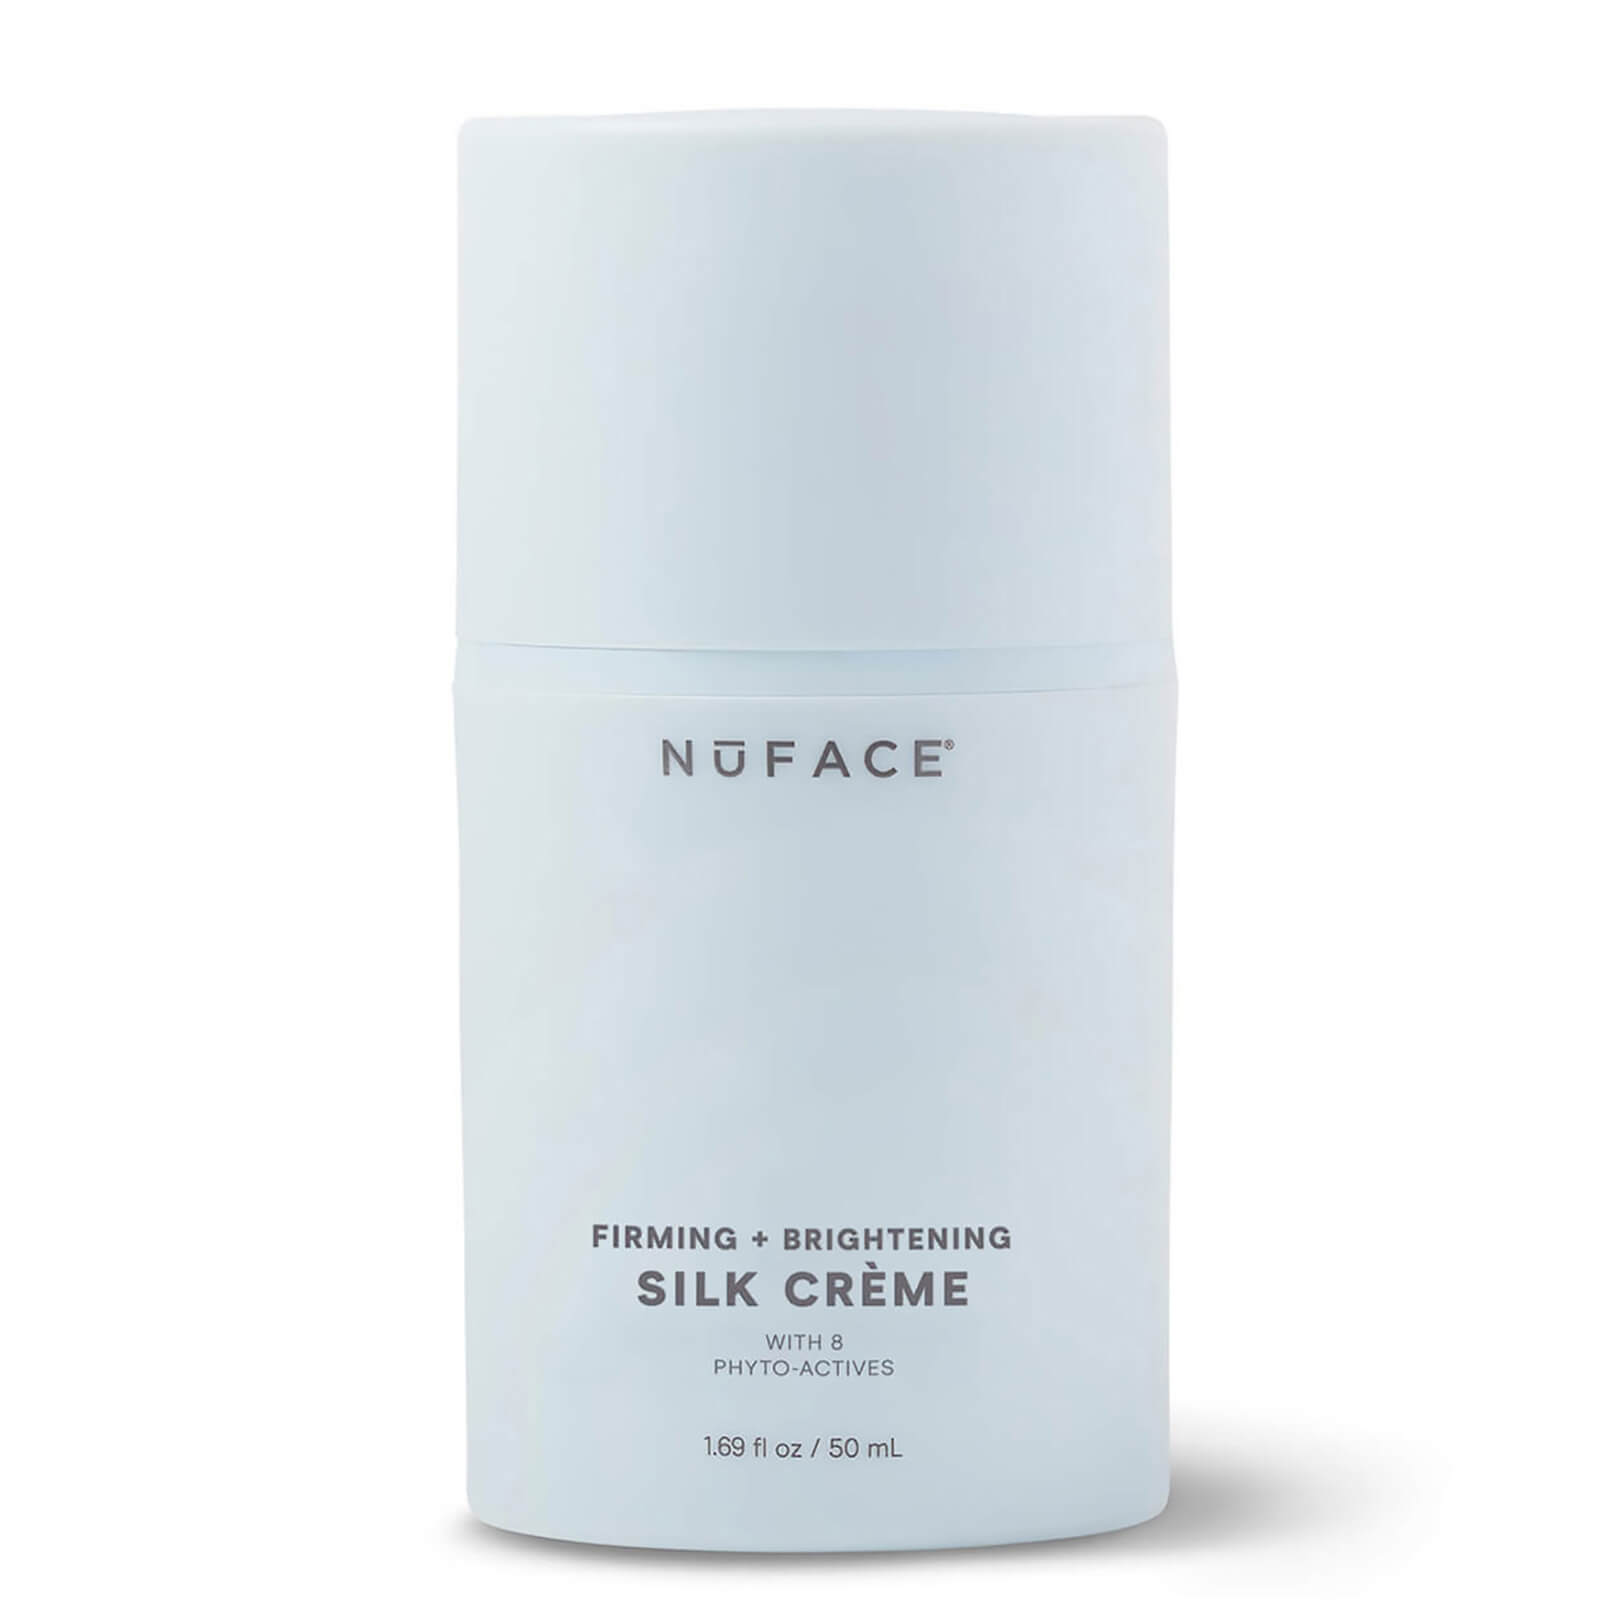 NuFACE Firming and Brightening Silk Creme 50ml